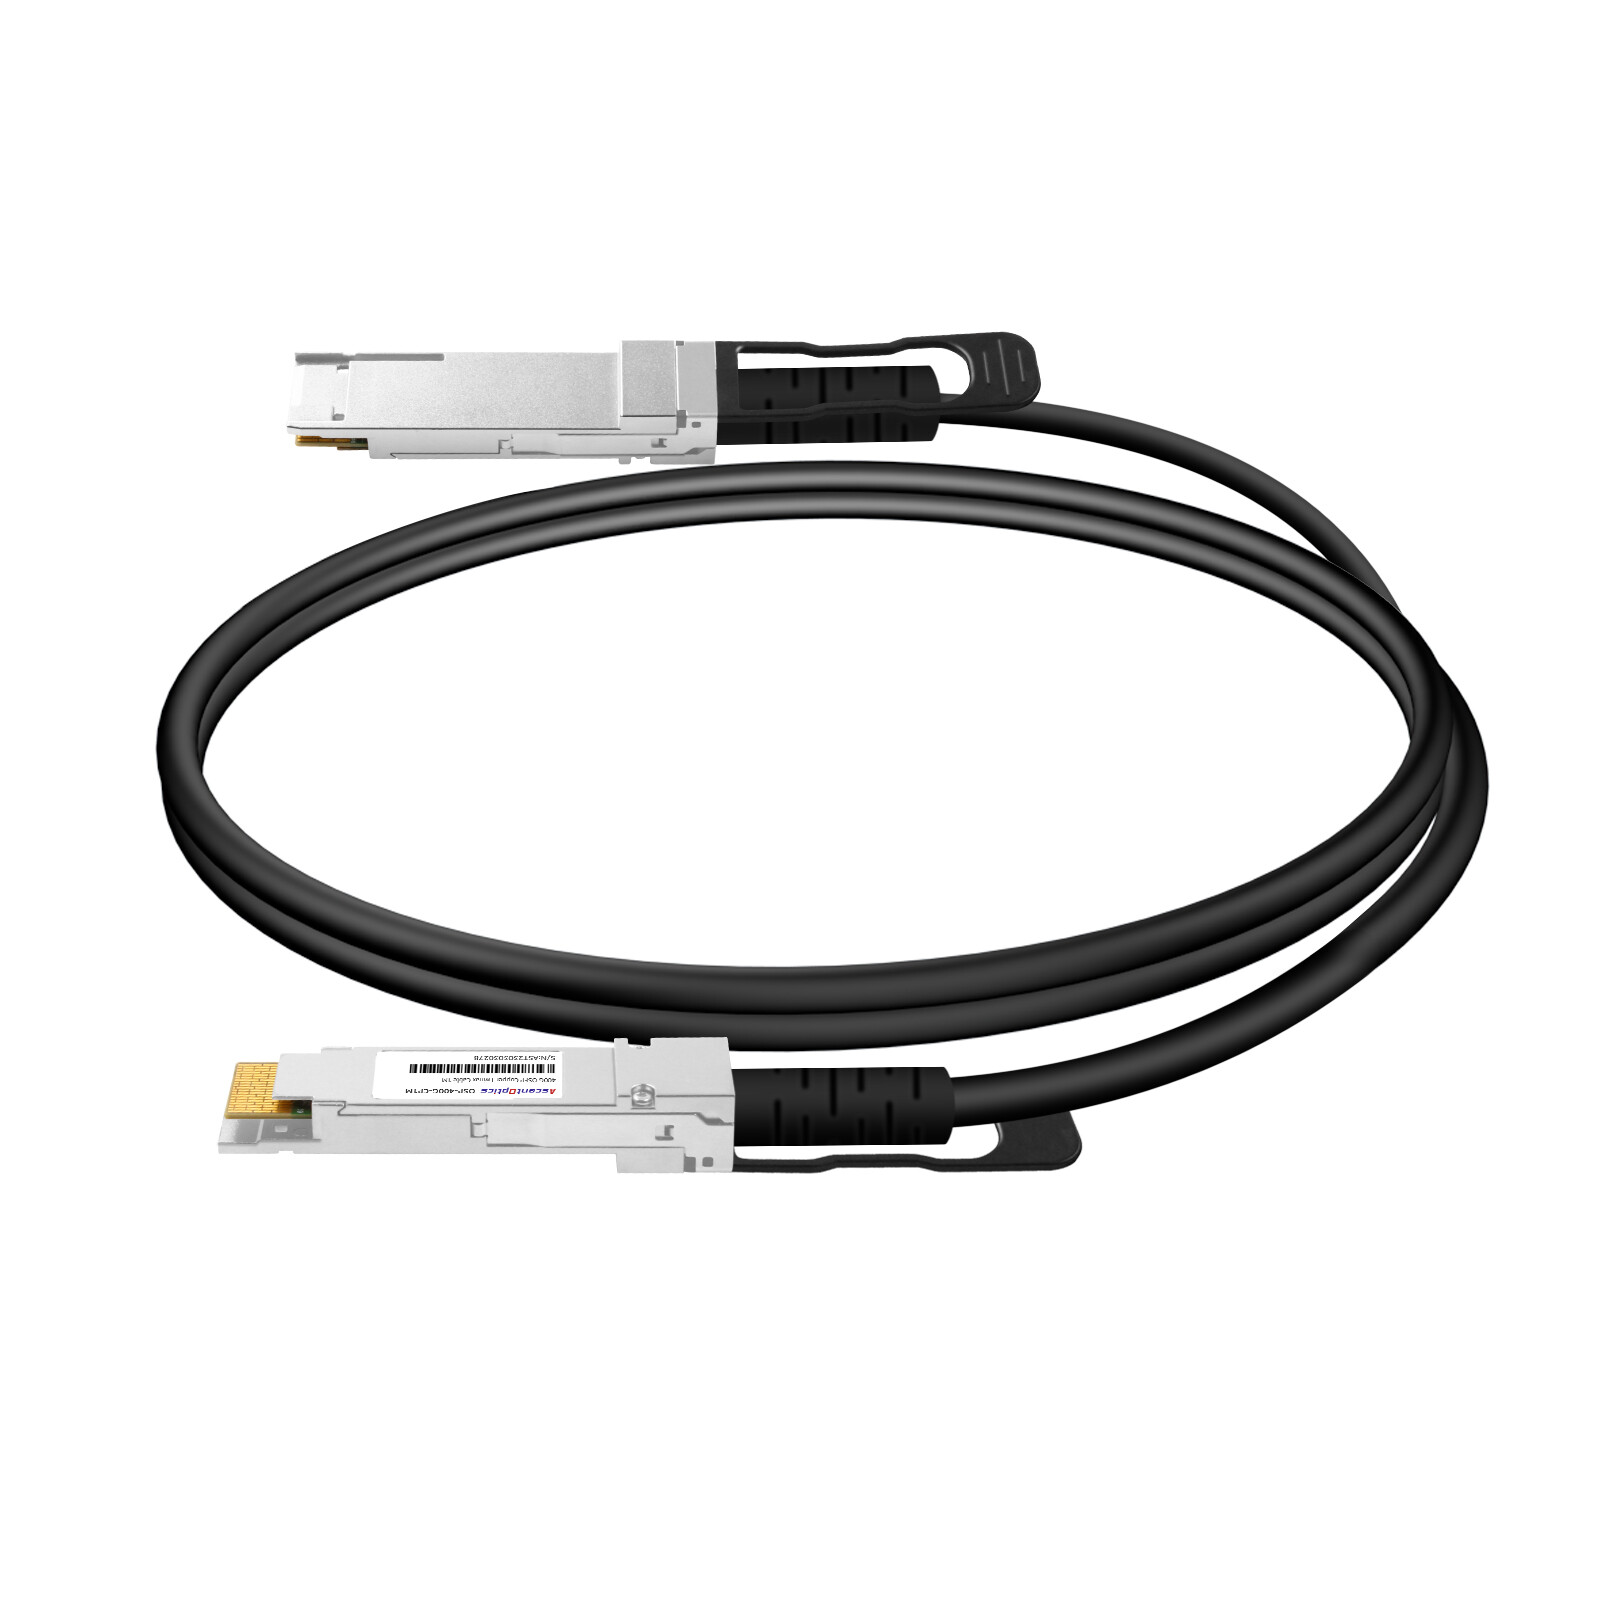 400G OSFP Copper DAC Cable,1 Meter,Passive